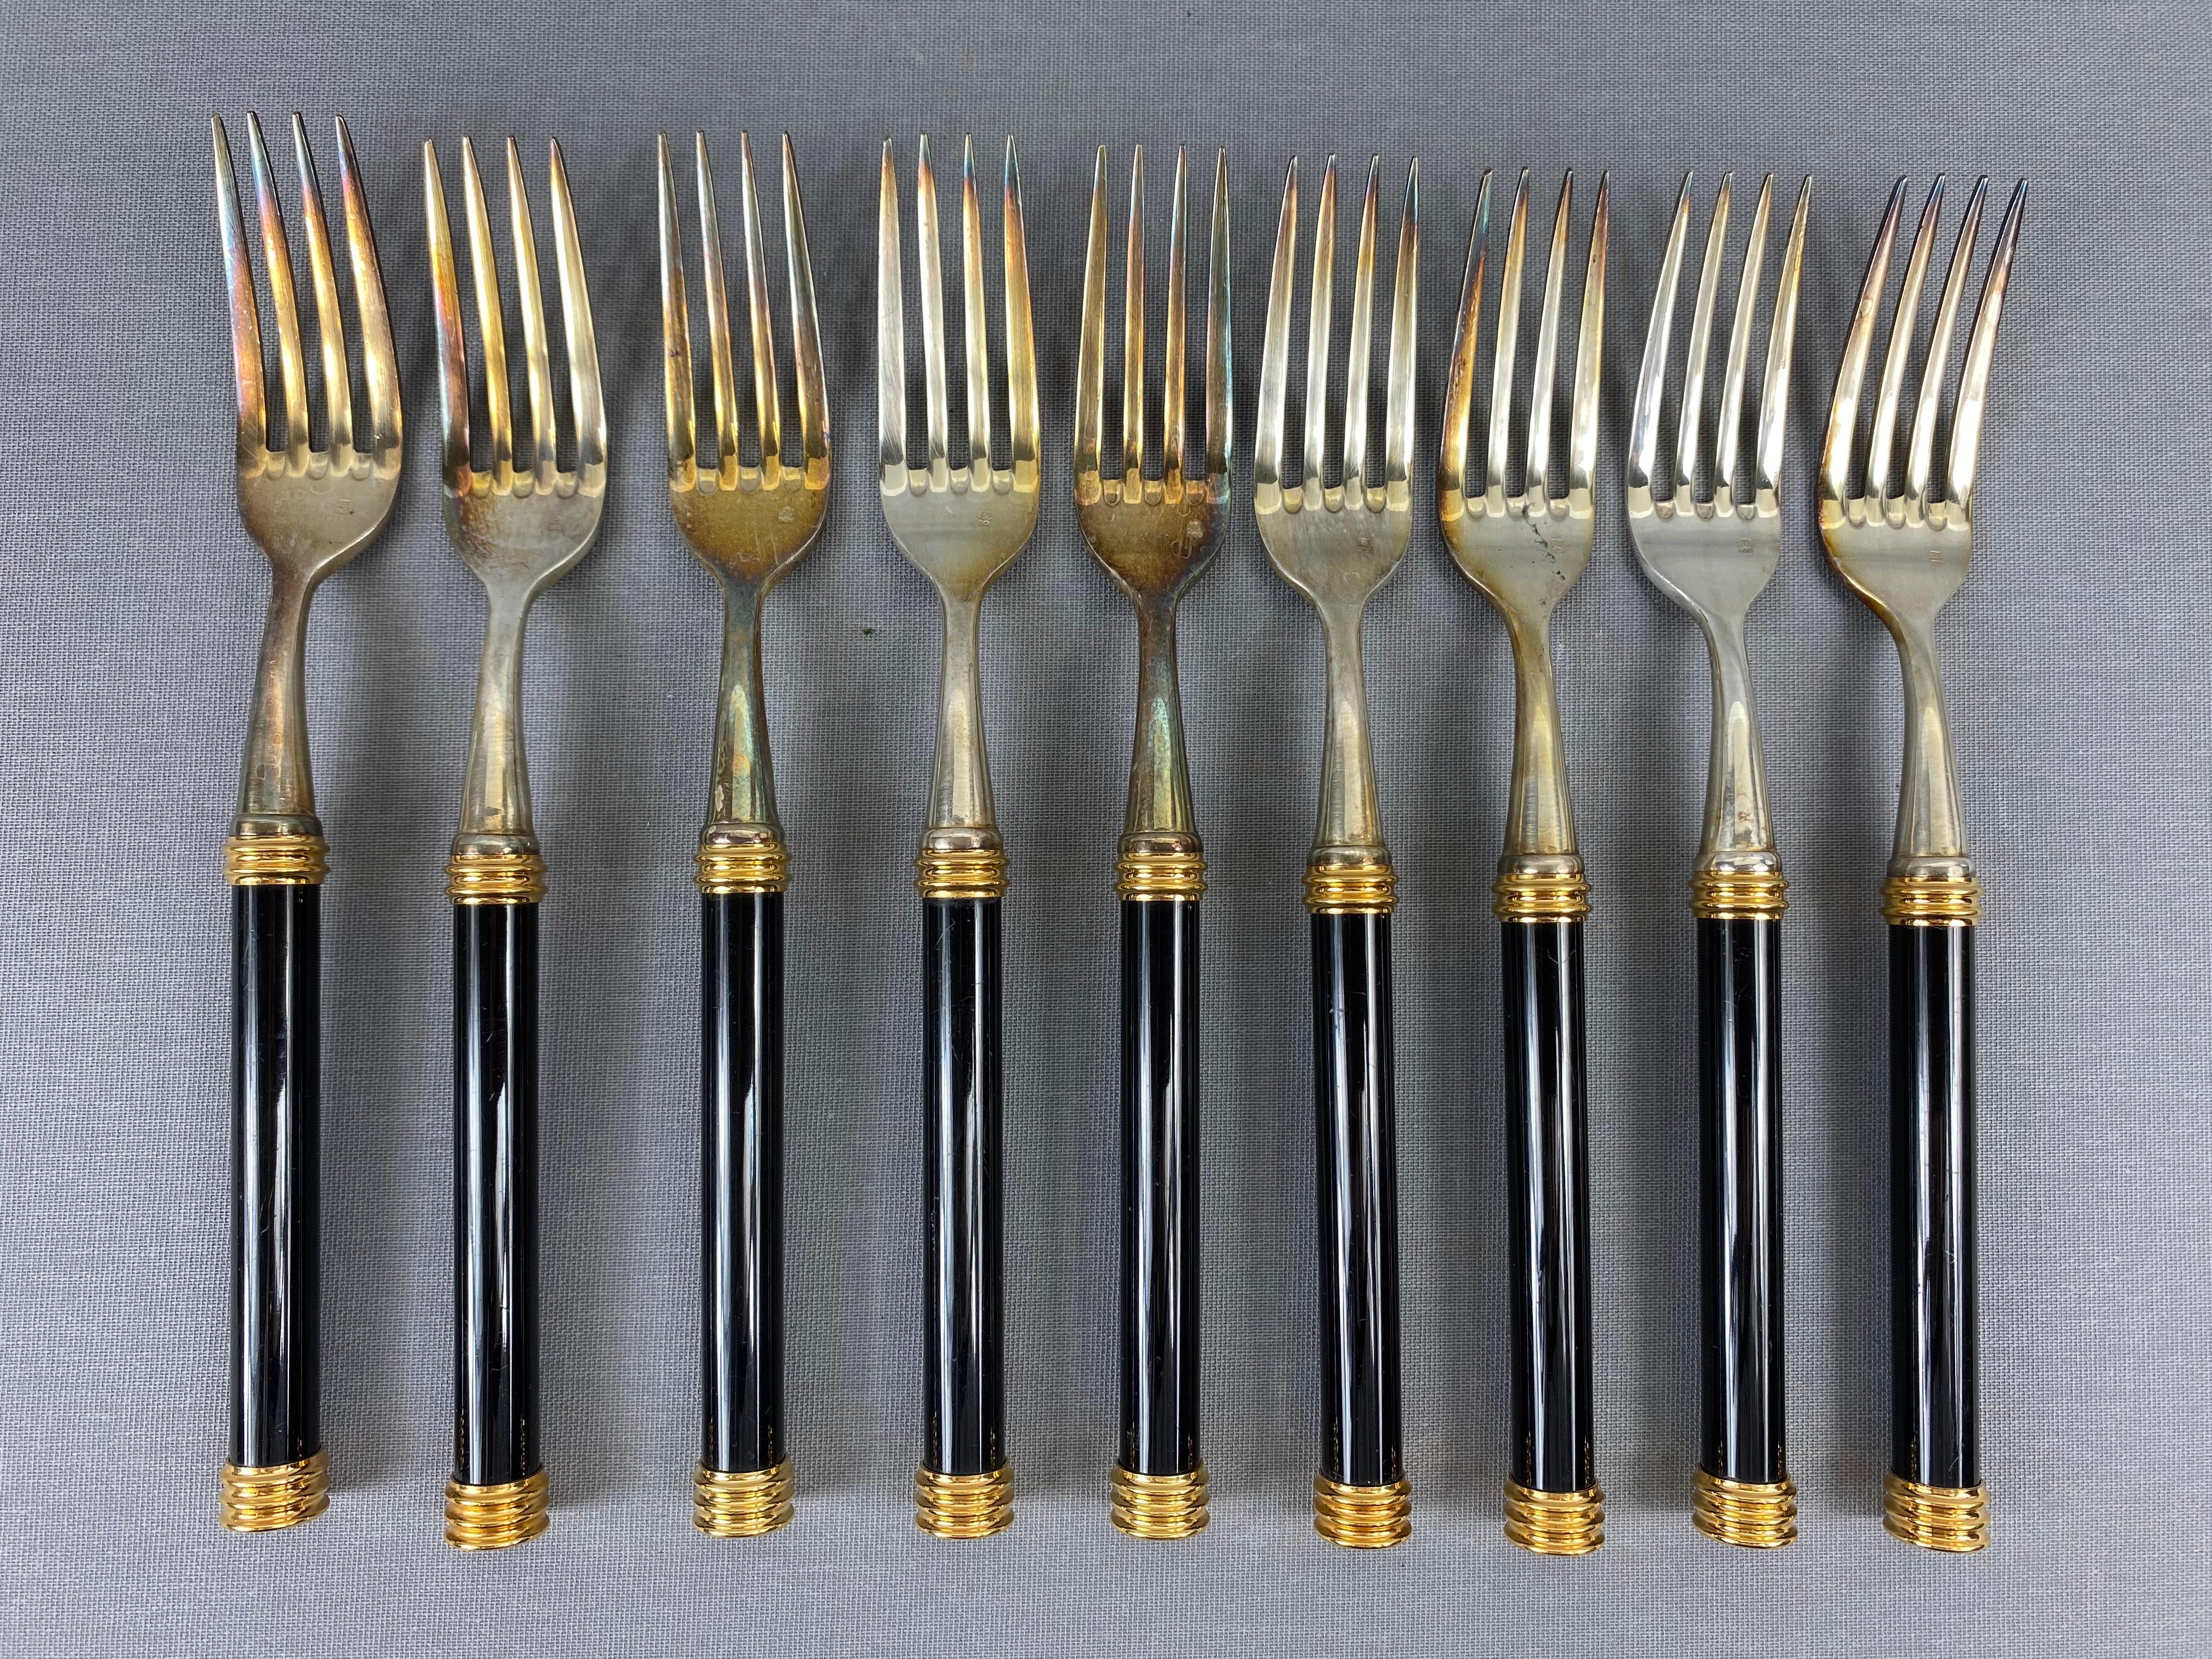 Mid-Century Modern Large and Rare Vuillermet France Cutlery Set in Black Gold with Knife Rests 60s